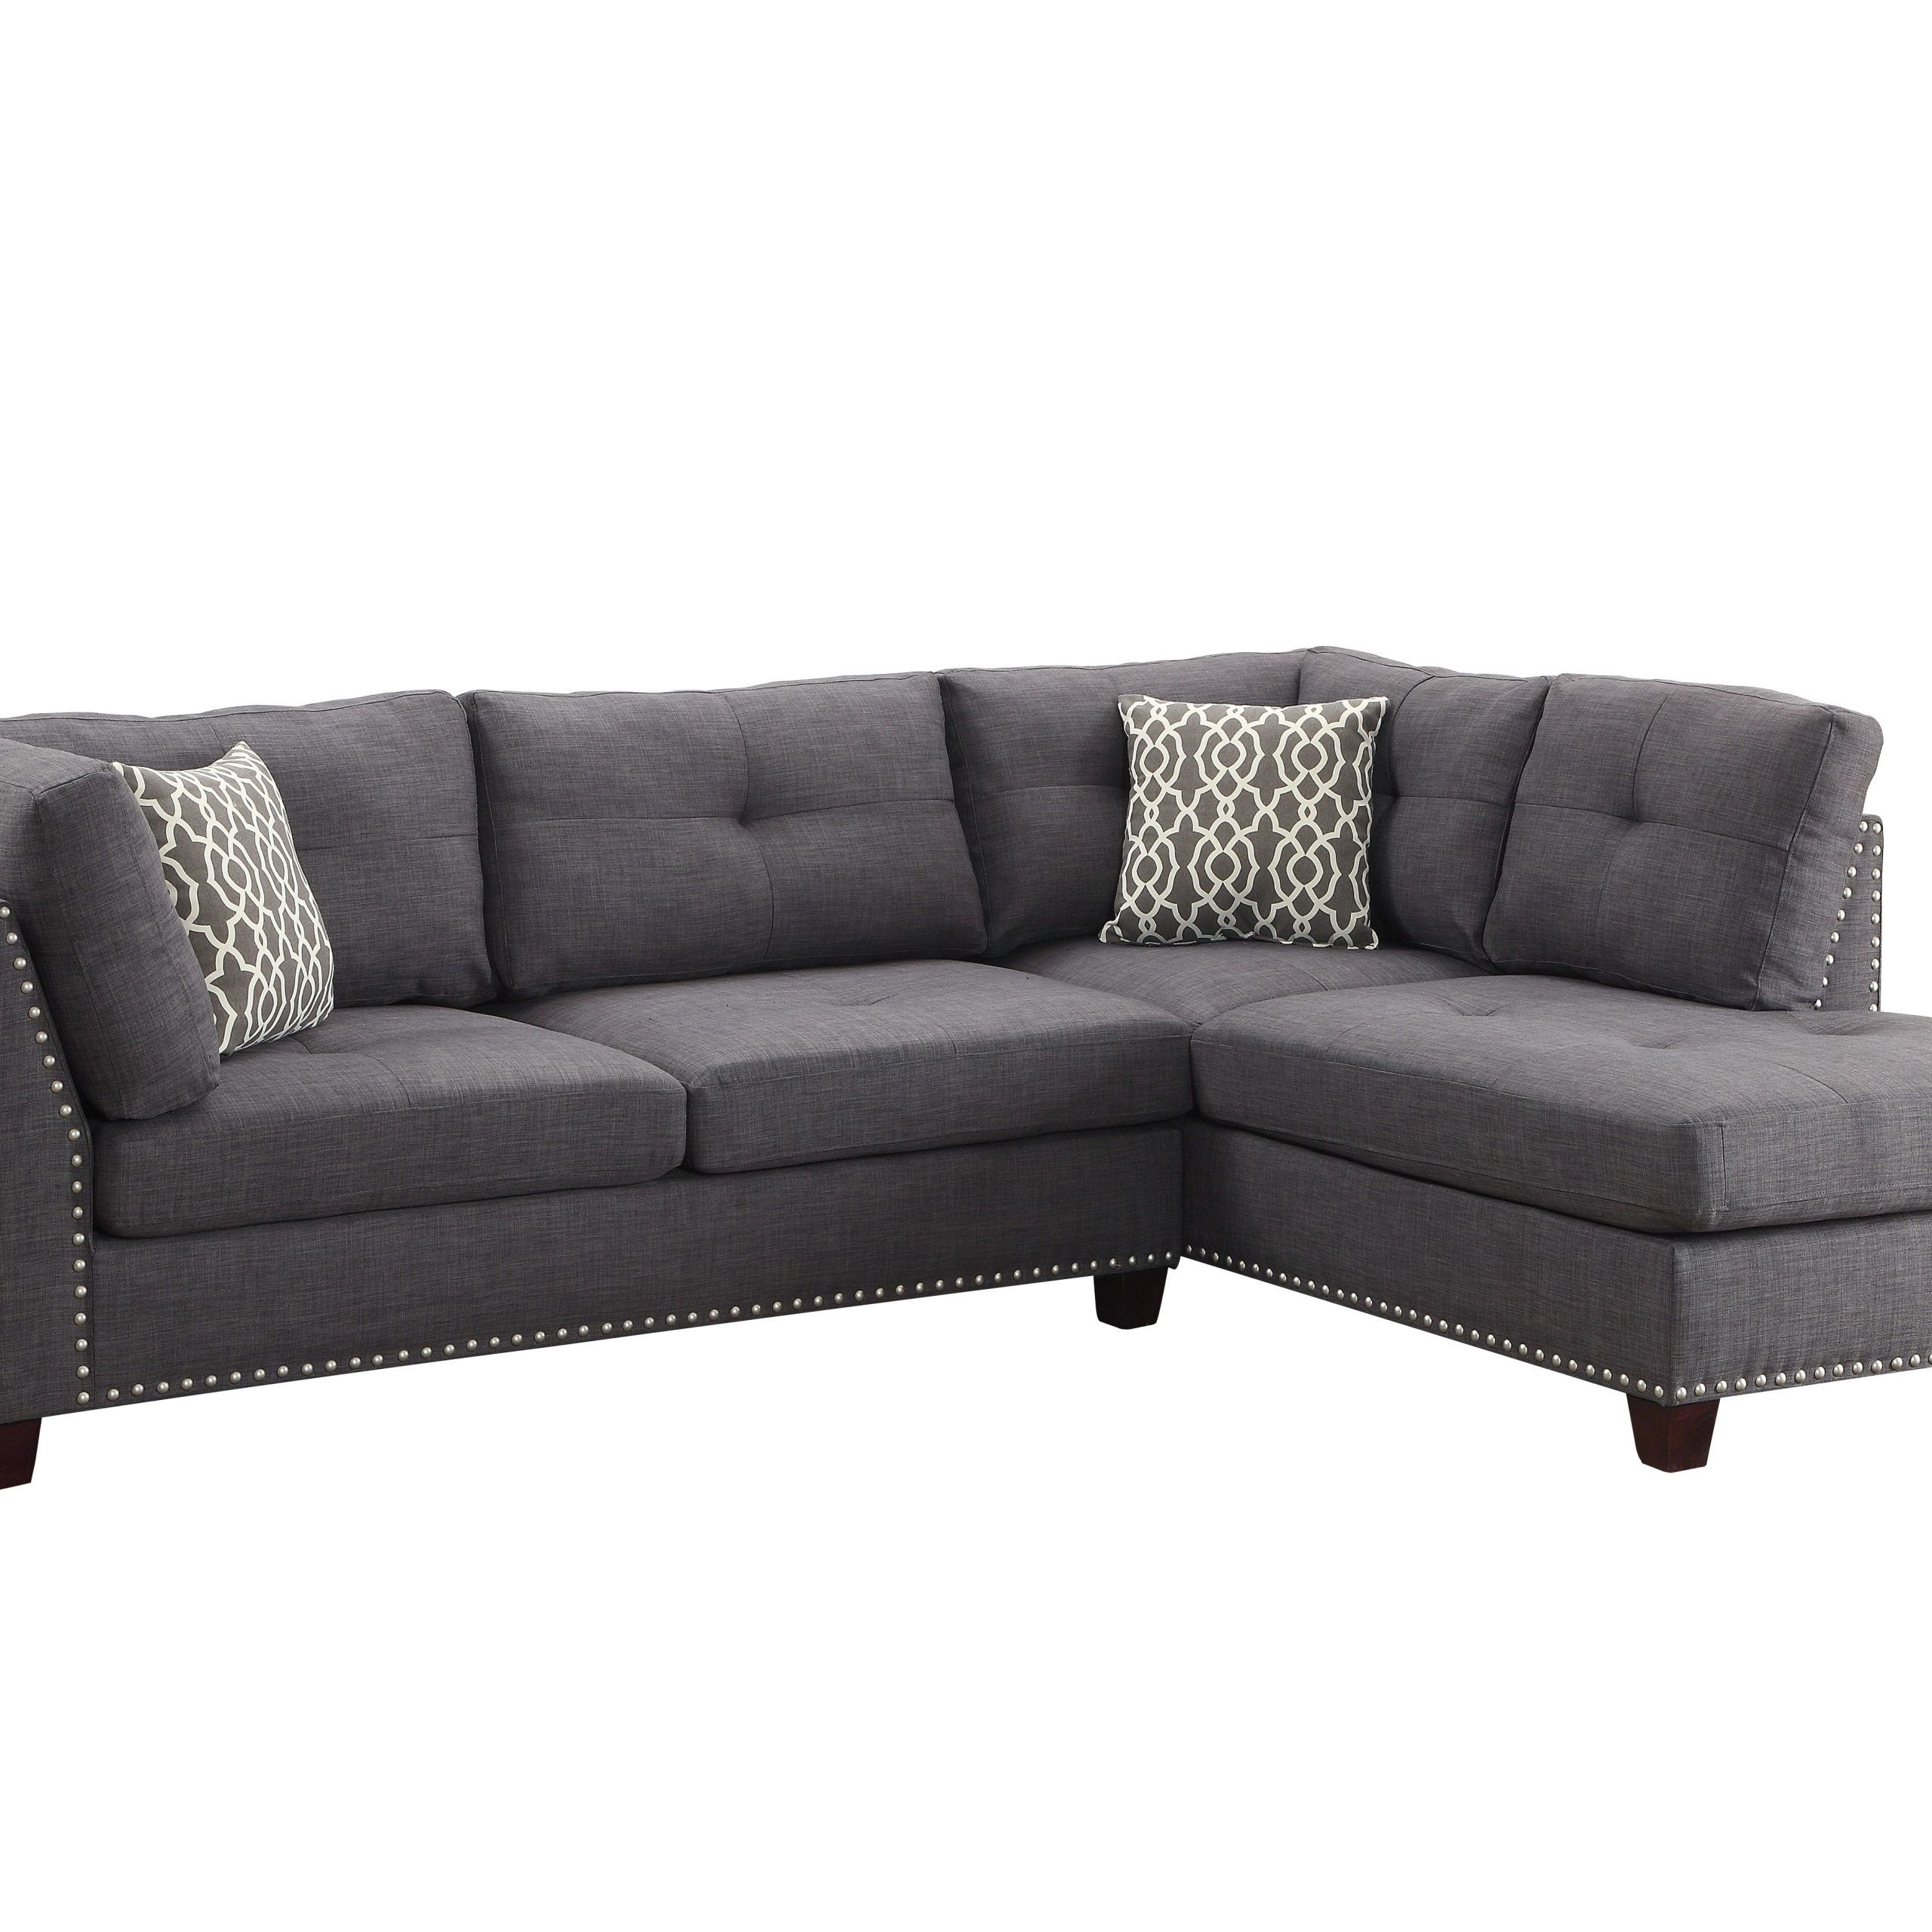 Laurissa Sectional Sofa With 2 Pillows & Ottoman In Light Charcoal Within Light Charcoal Linen Sofas (View 2 of 20)